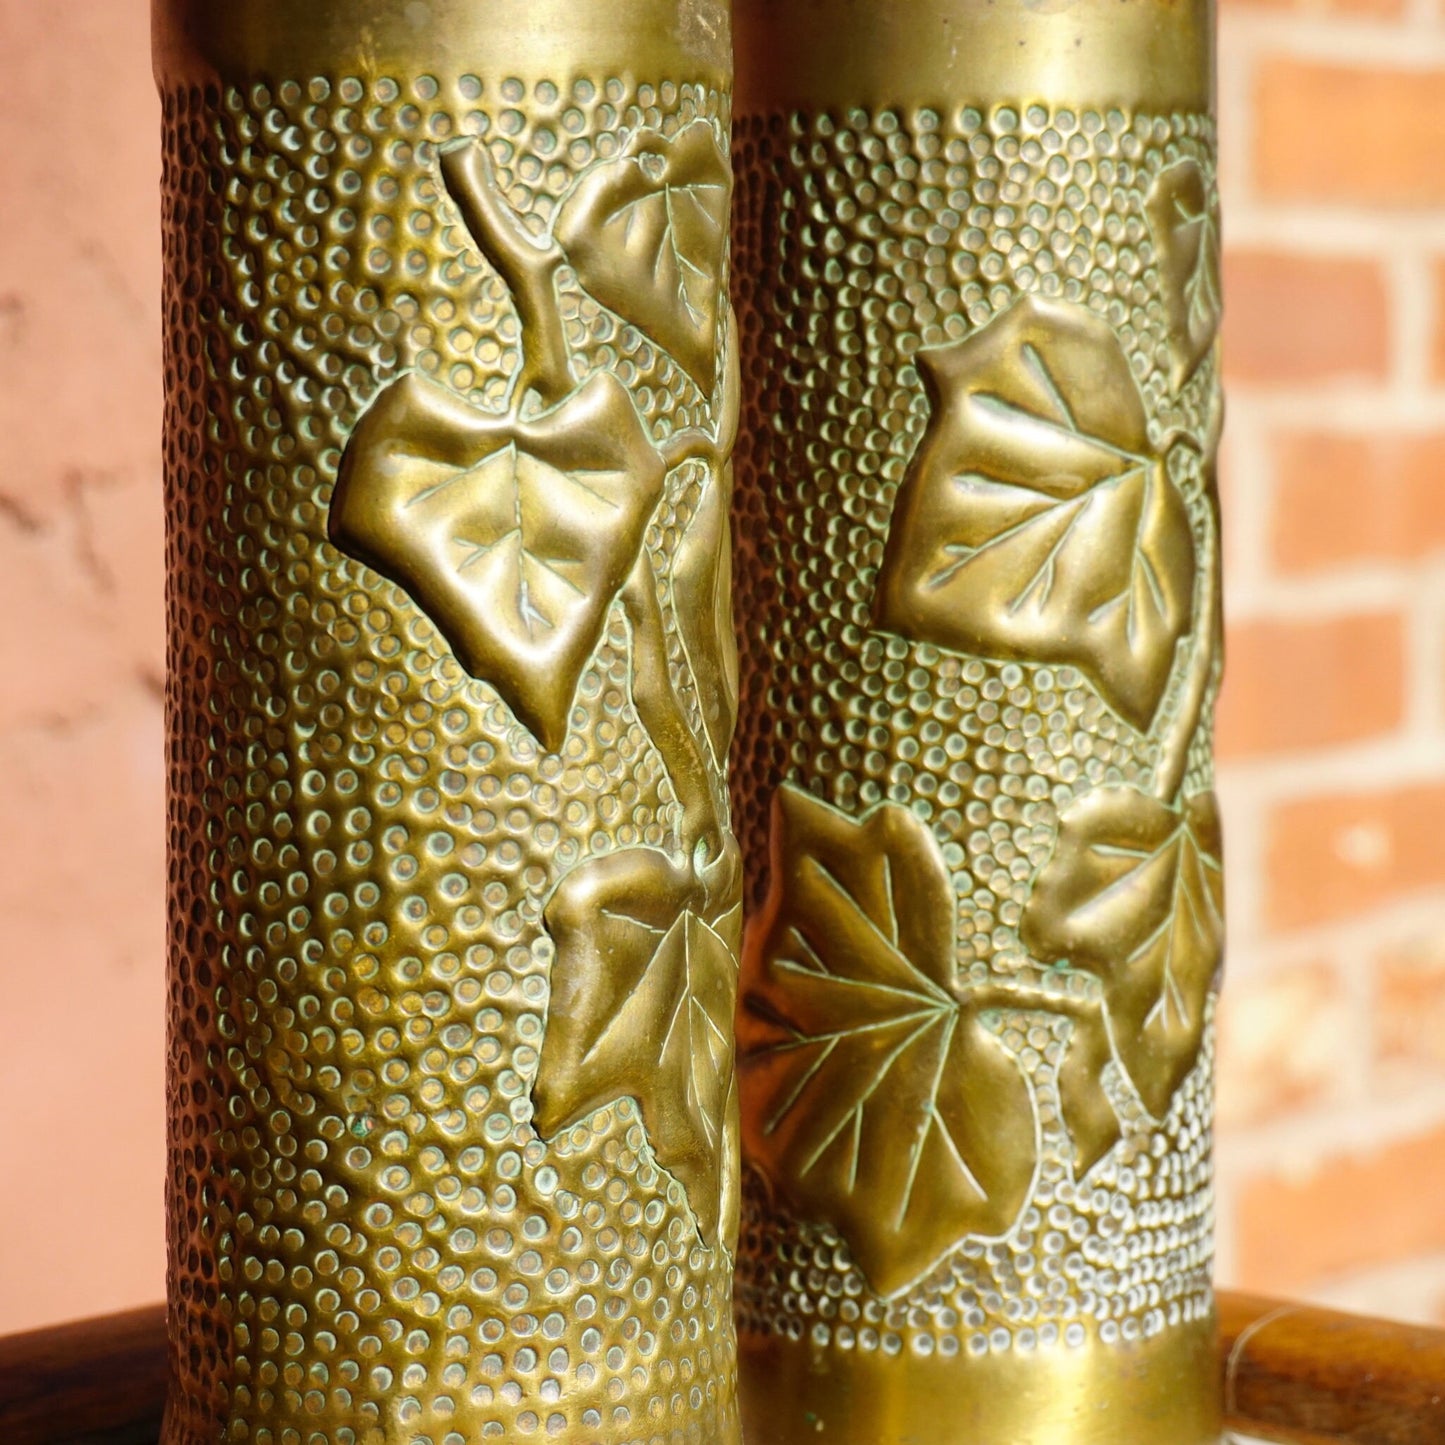 Antique brass shell casing from 1917 etched with intricate leaf design, repurposed as decorative brush holder or vase, example of World War I trench art